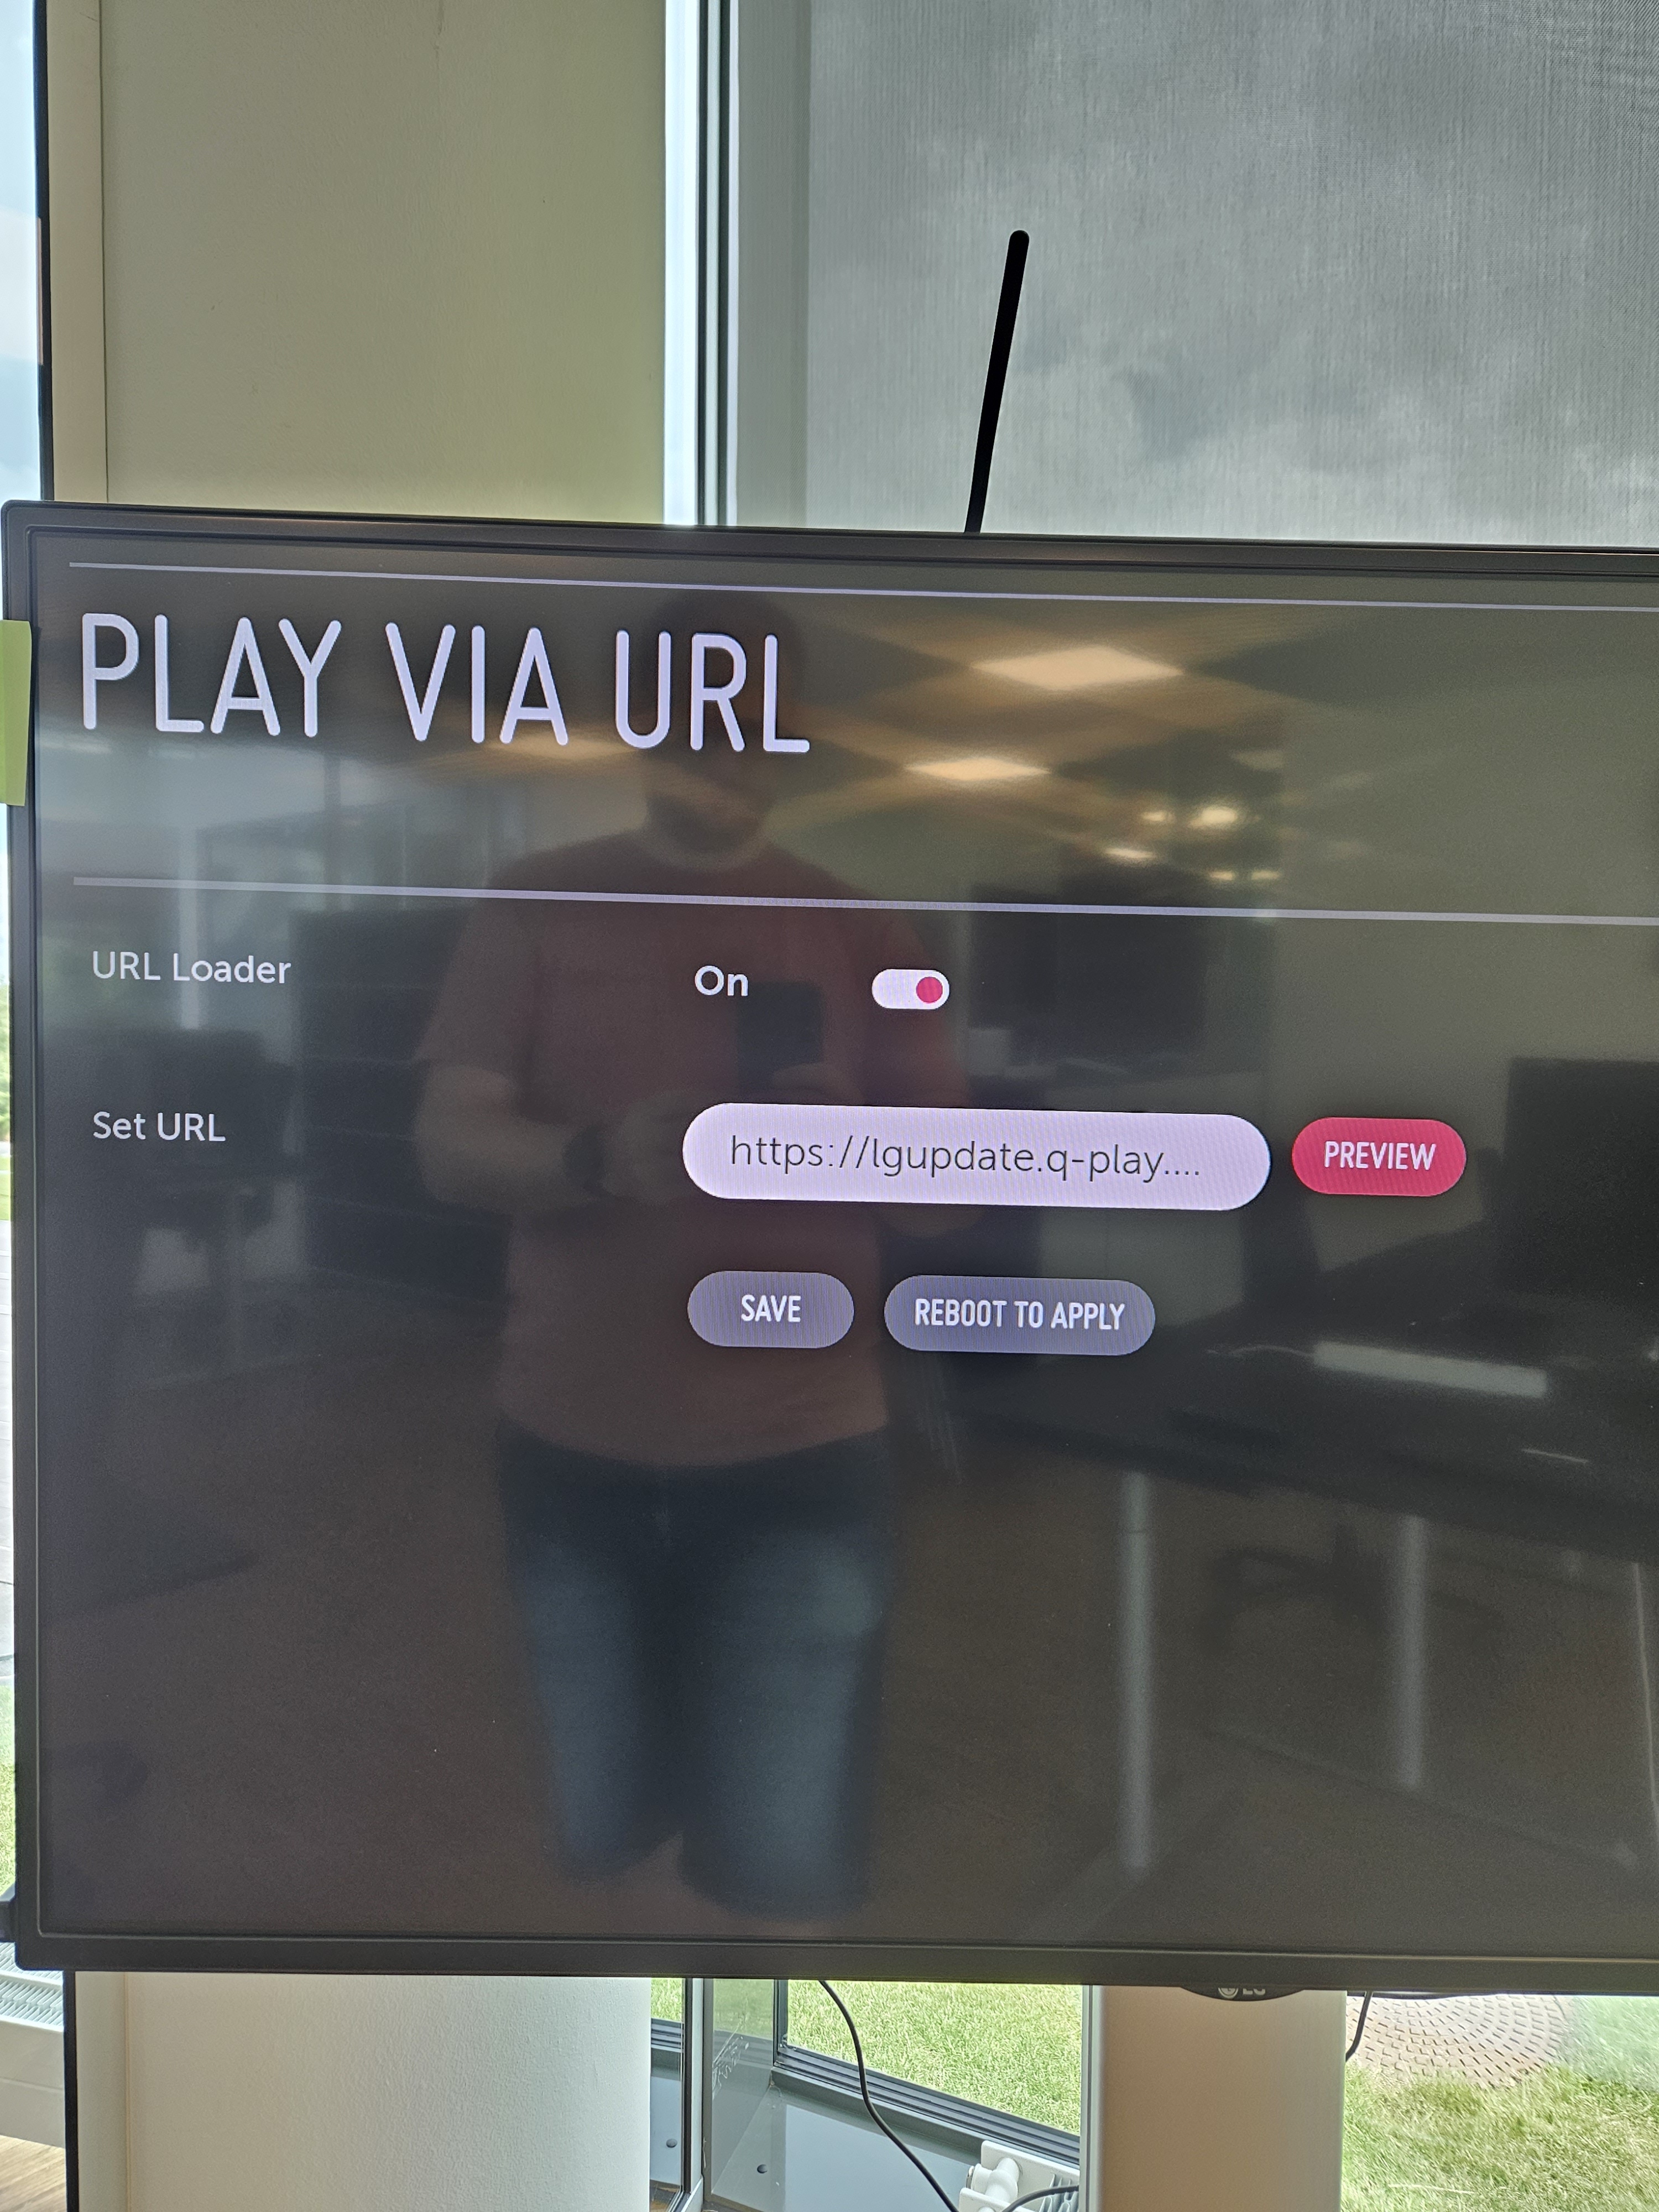 Digital display interface titled 'PLAY VIA URL' with toggles for URL Loader set to On, input field for URL, and buttons for Save, Preview, and Reboot to Apply.